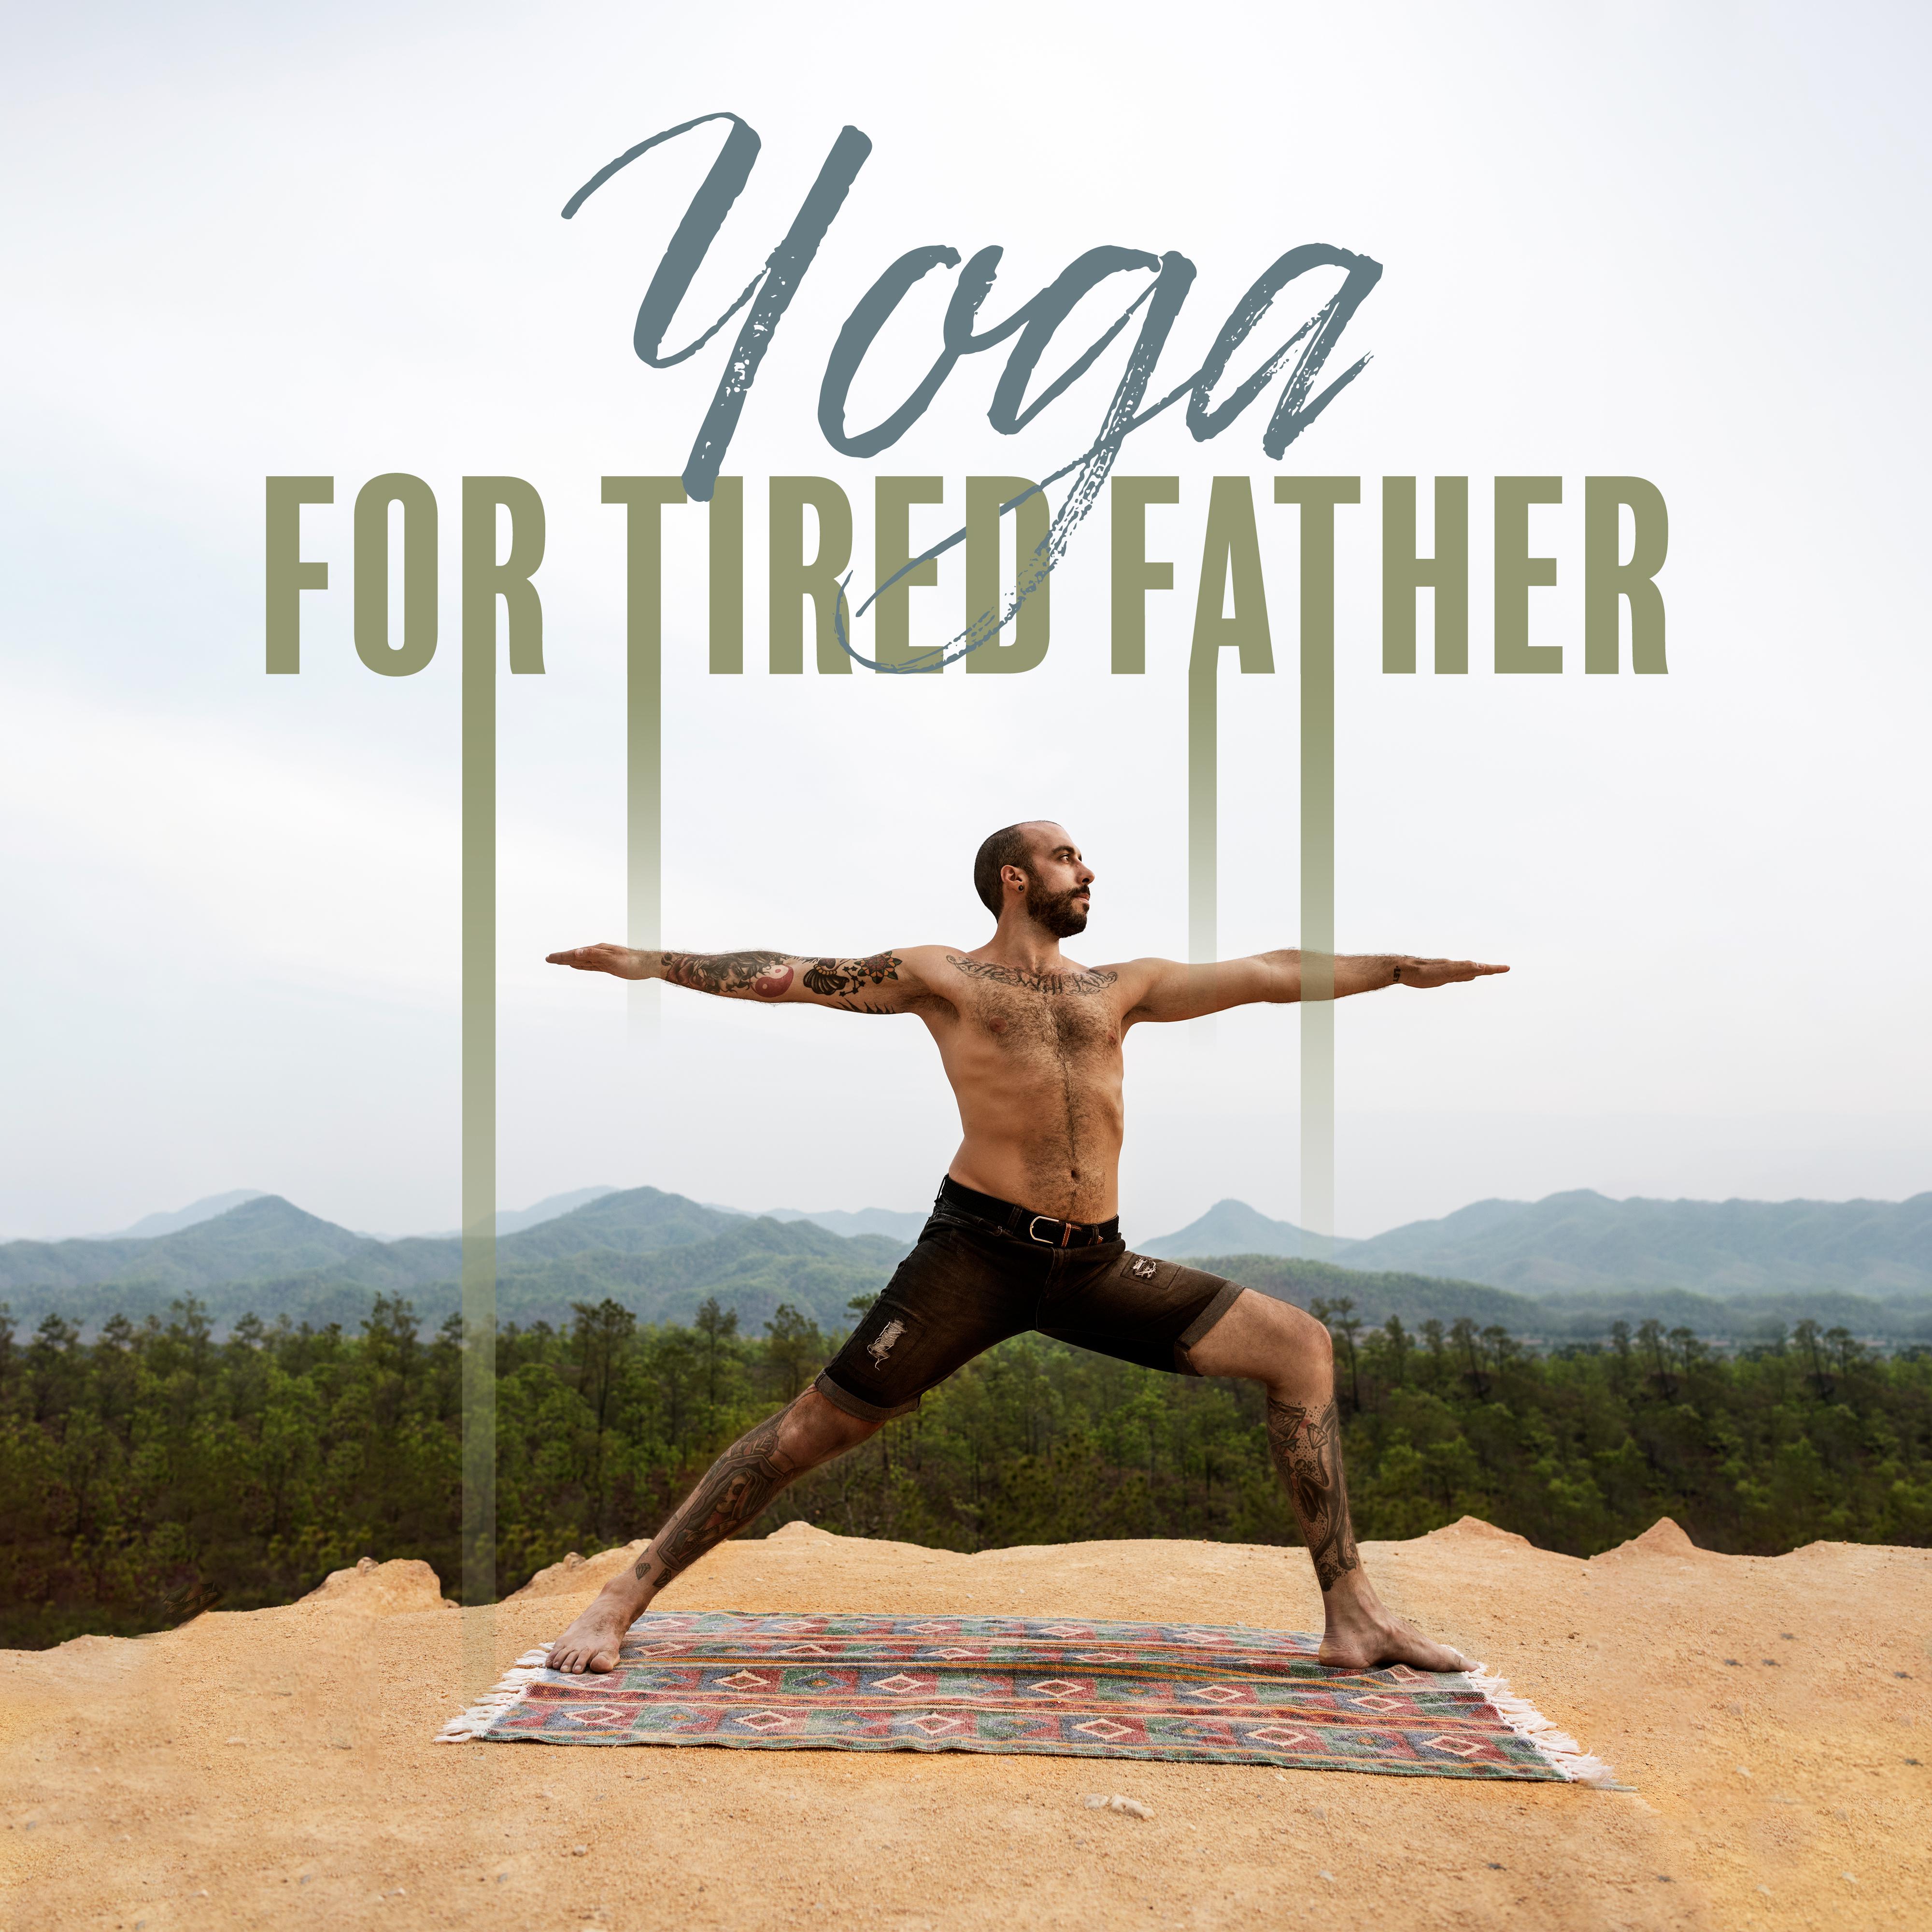 Yoga for Tired Father: Music for Father' s Day, Calming Chillout Moods, Yoga Meditation, Deep Relax, Zen, Ambient Music, Yoga Training with Family